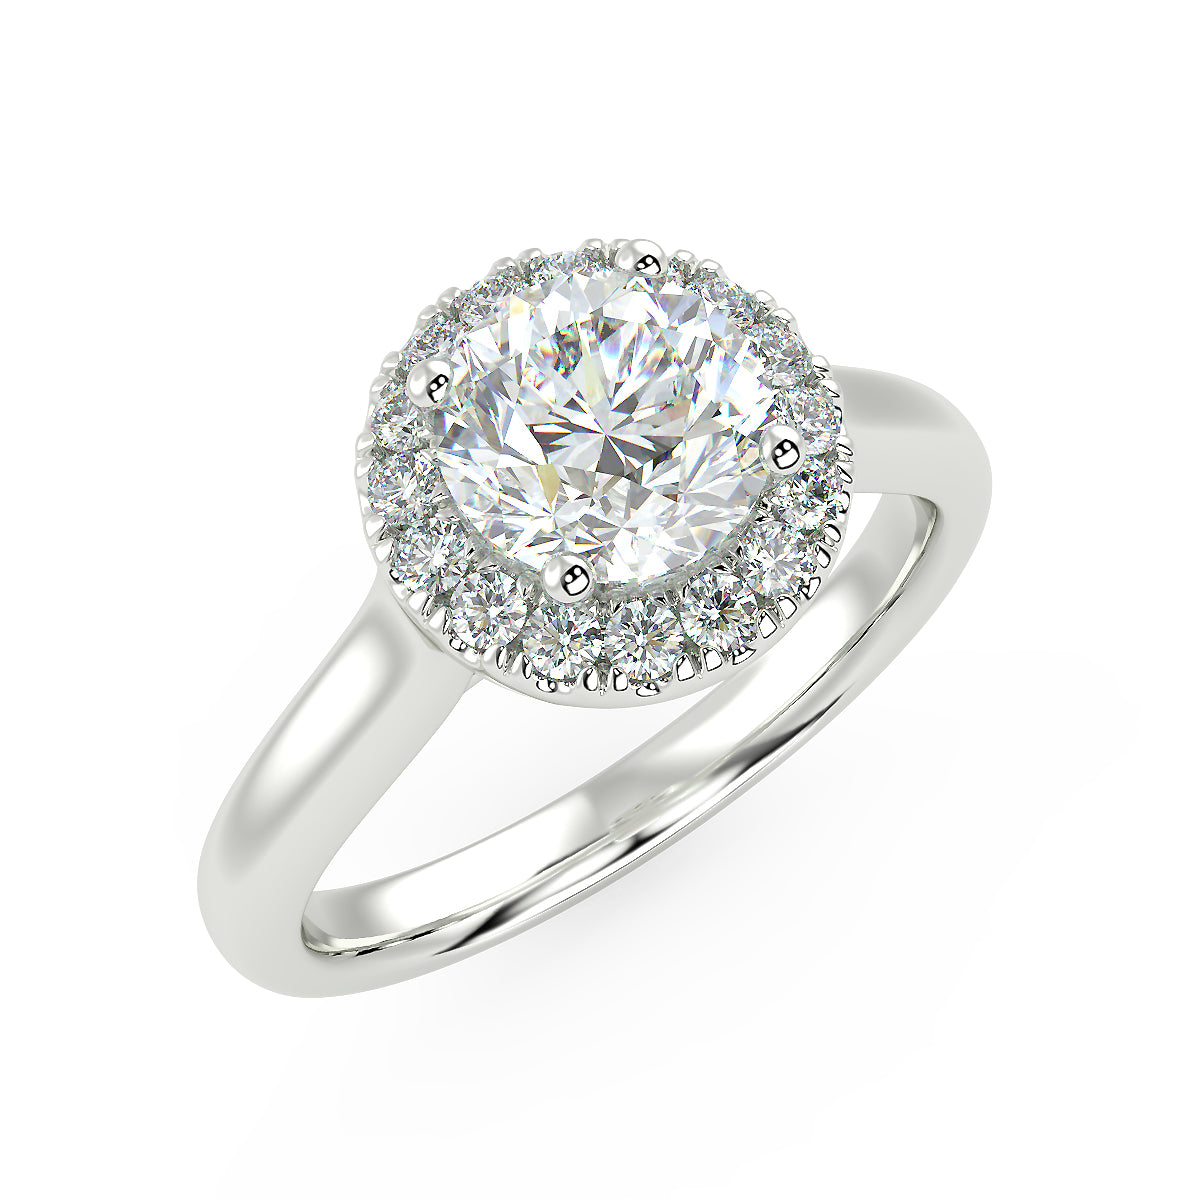 Rigel Engagement Ring in White Gold